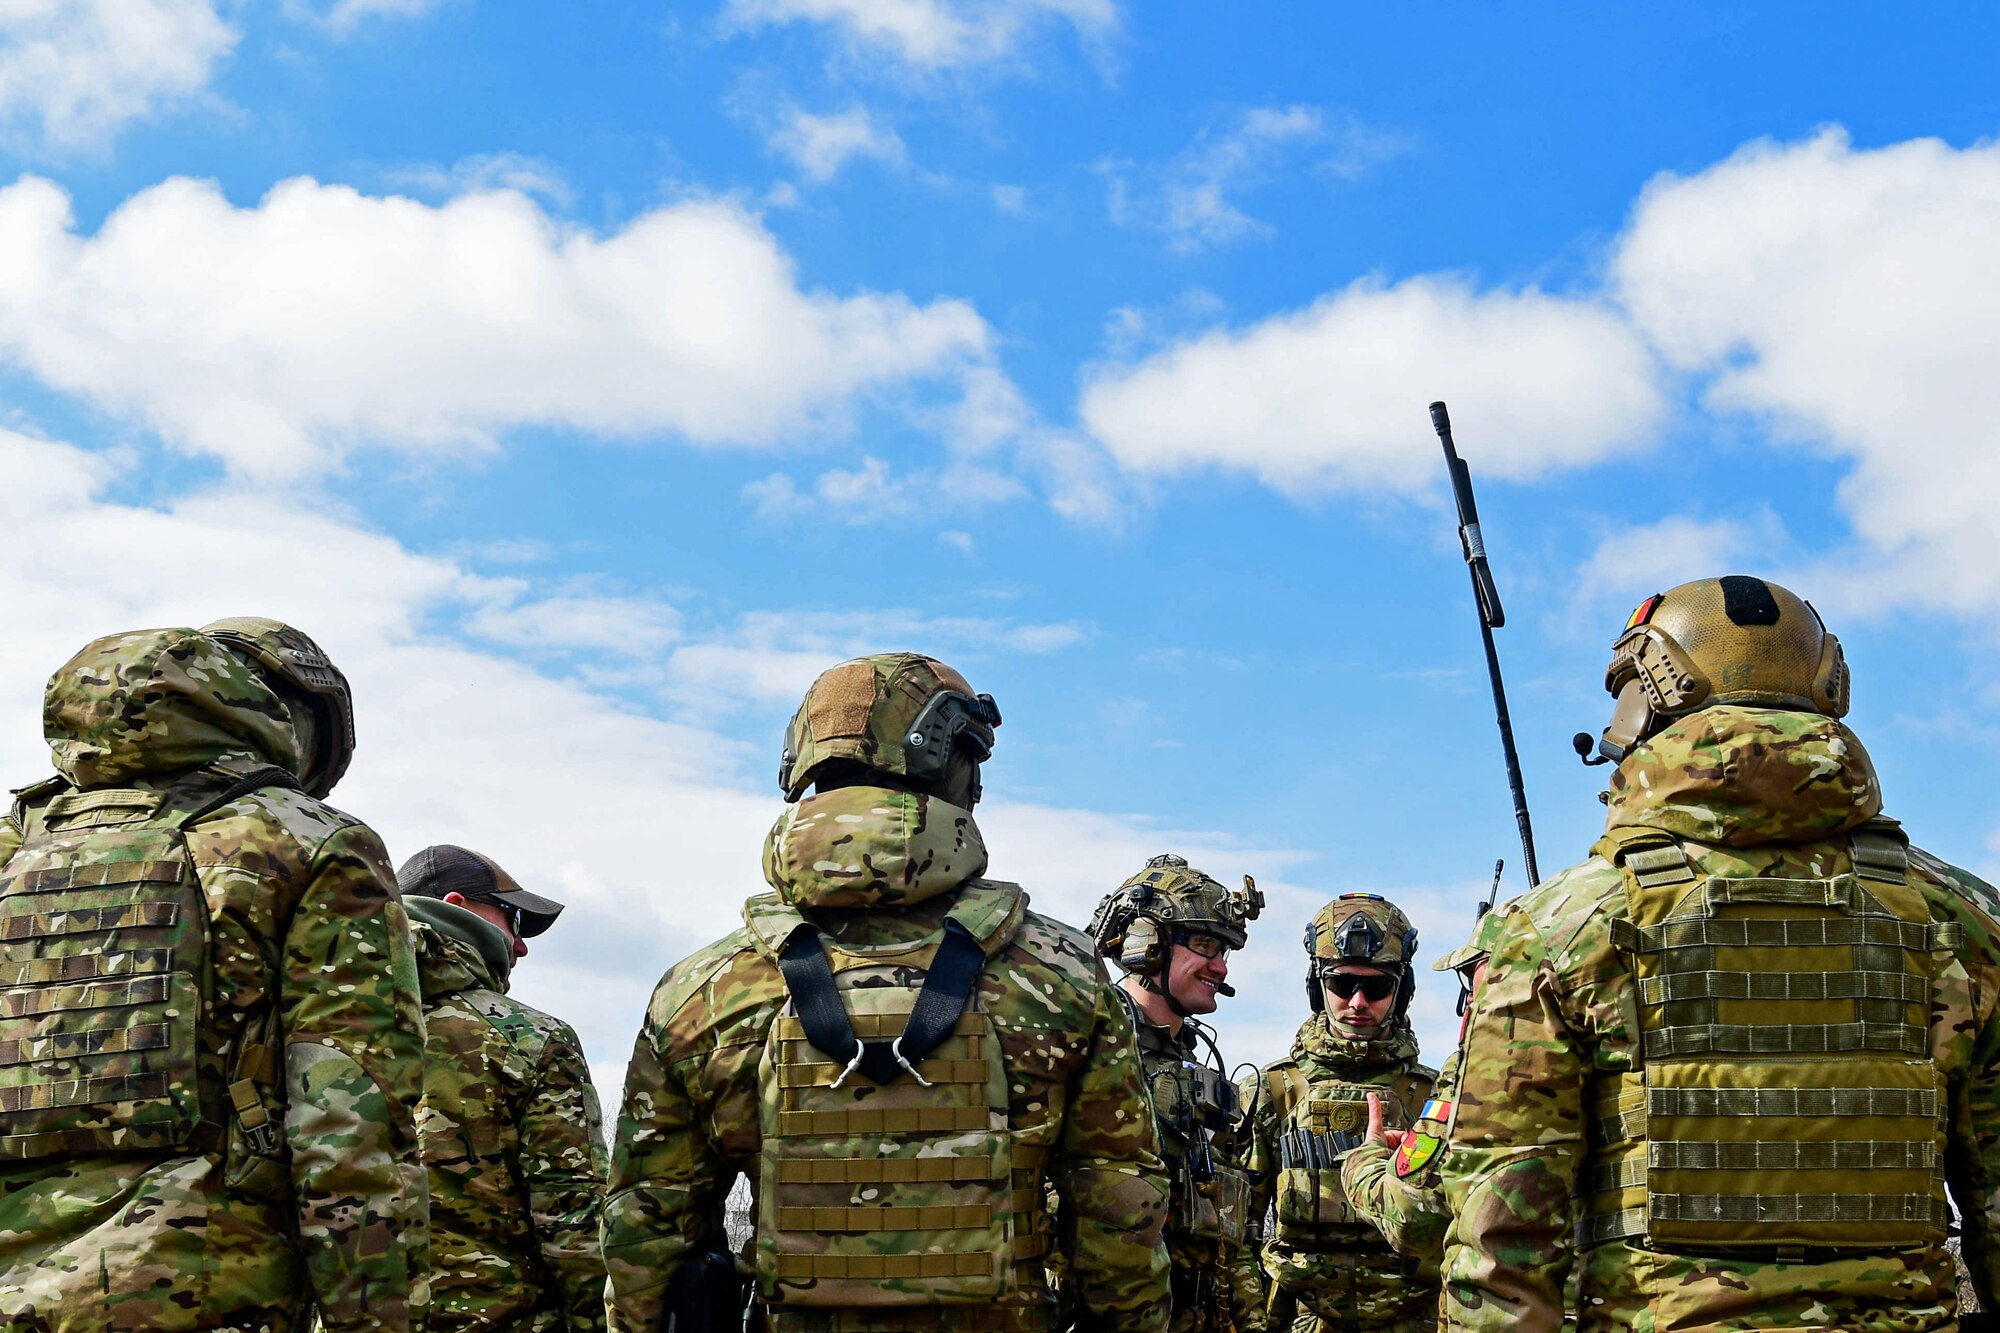 U.S. Air Force 1st Lt. Alexander Mount, 57th Rescue Squadron combat rescue officer, center, speaks with the 51st Commando Battalion Romanian special forces in Romania, March, 9, 2022. Mount assisted the Royal Marines Commando Mobile Air Operations team in teaching safe operations for loading and unloading an HH-60G Pave Hawk assigned to the 56th RQS. (U.S. Air Force photo by Senior Airman Noah Sudolcan)